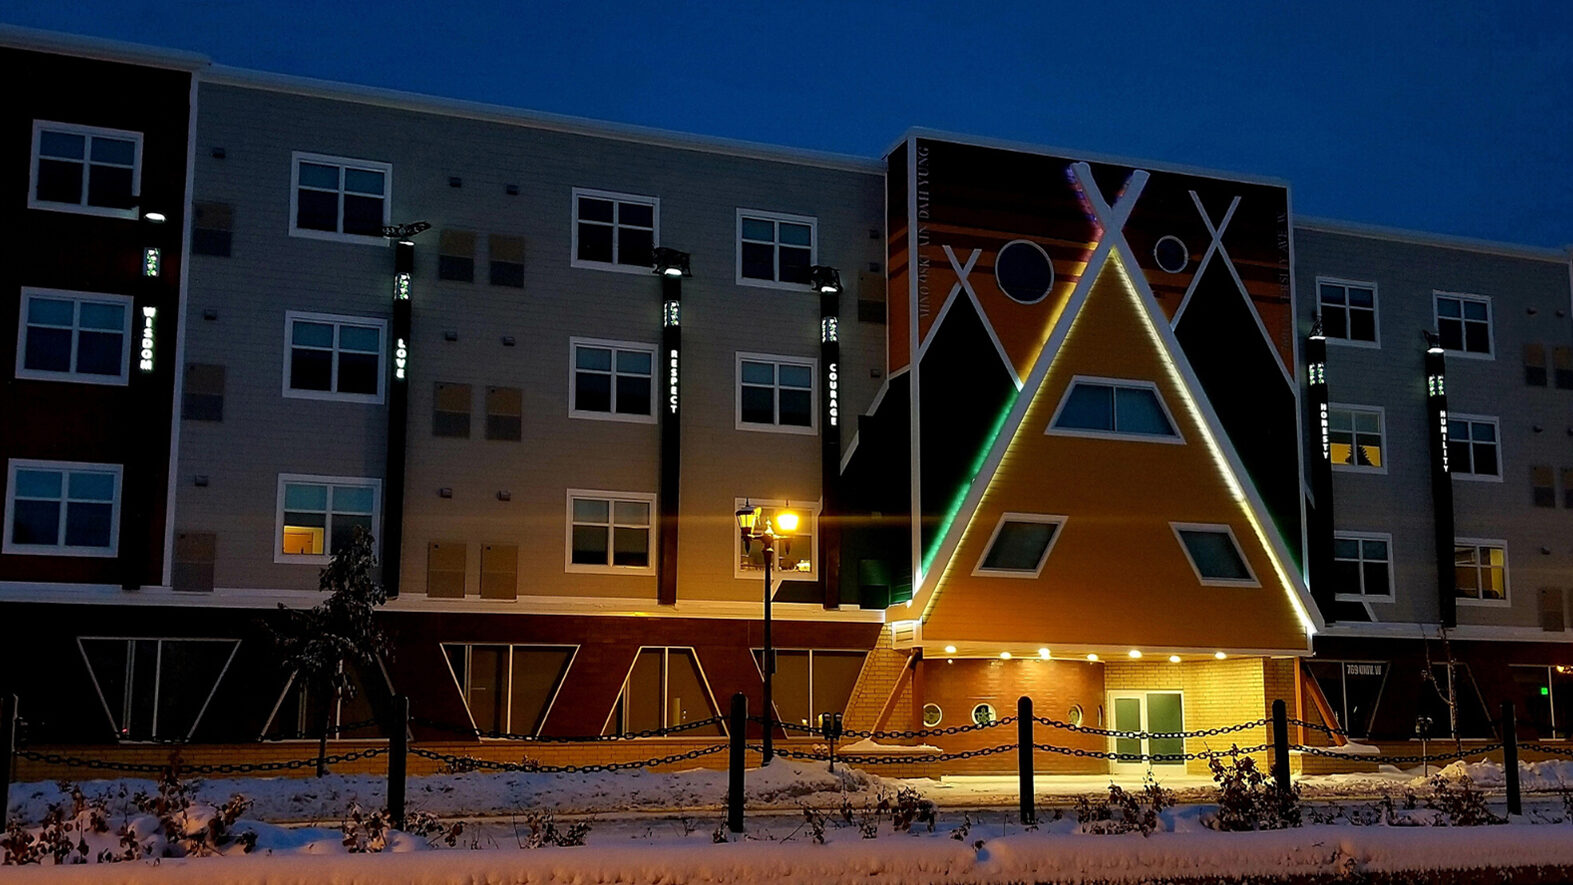 Exterior of Mino Oski Ain Dah Yung supportive housing complex for young adults, showing lighted entryway